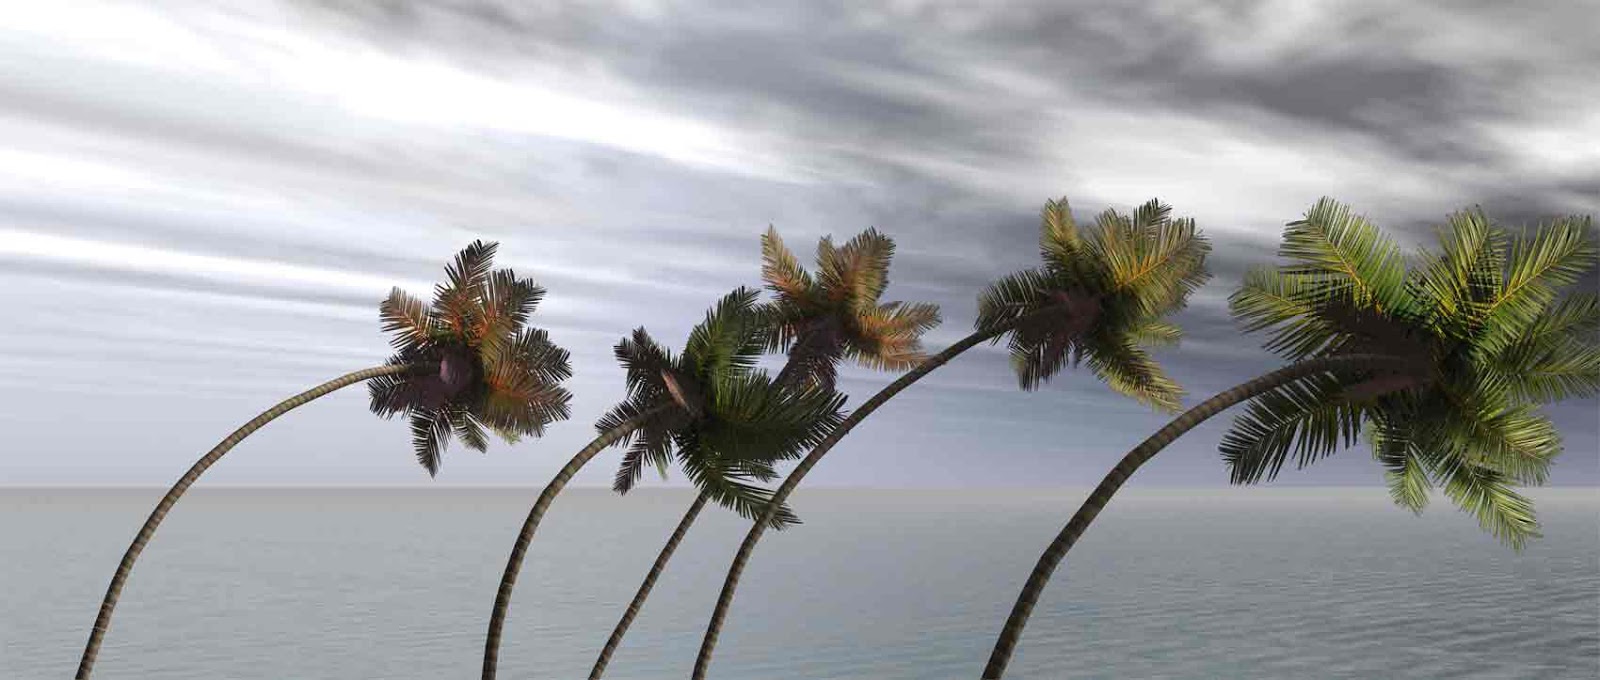 A Novel Creation www.WatersWords.com: A Palm Tree Kind of Resiliency